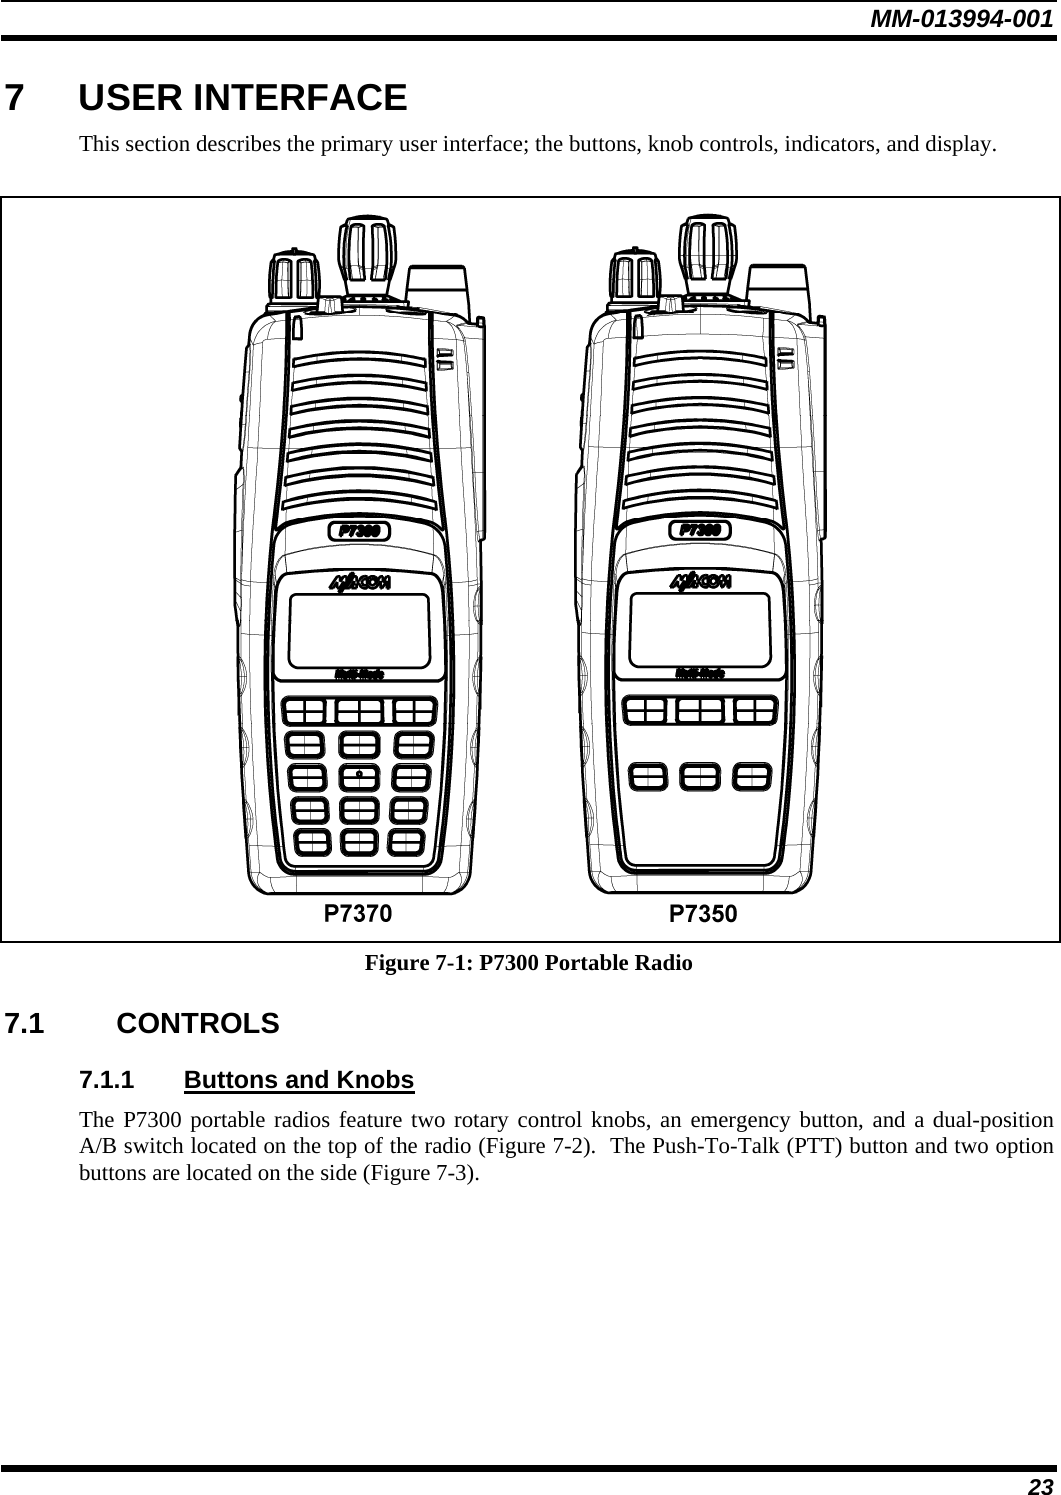 MM-013994-001 23 7 USER INTERFACE This section describes the primary user interface; the buttons, knob controls, indicators, and display.     Figure 7-1: P7300 Portable Radio 7.1 CONTROLS 7.1.1  Buttons and Knobs The P7300 portable radios feature two rotary control knobs, an emergency button, and a dual-position A/B switch located on the top of the radio (Figure 7-2).  The Push-To-Talk (PTT) button and two option buttons are located on the side (Figure 7-3). 